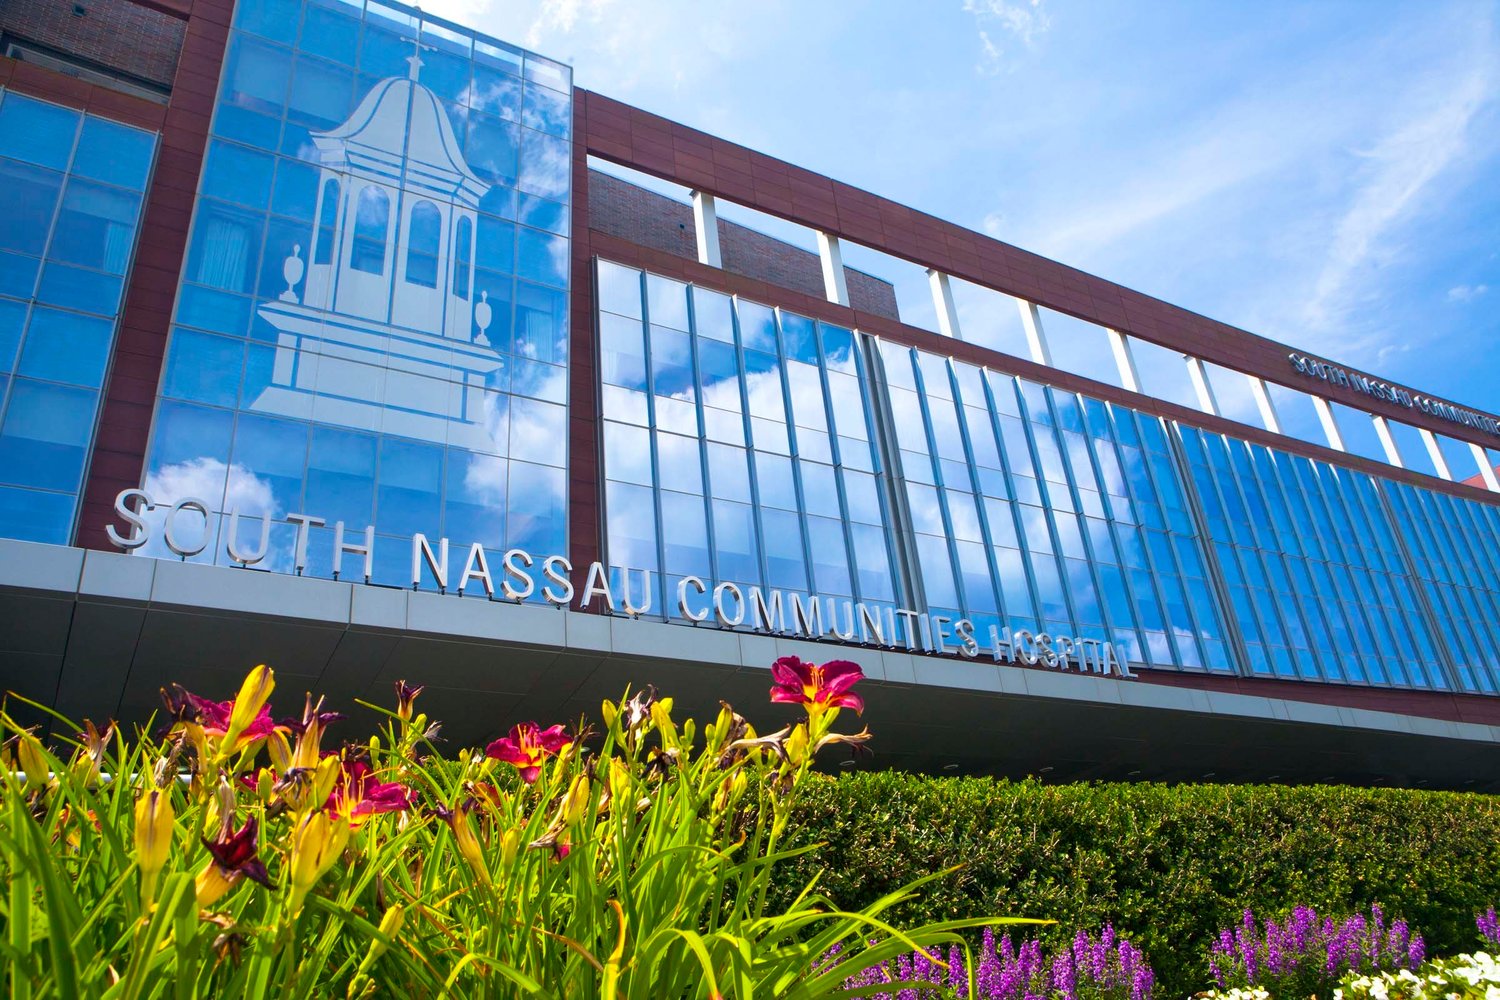 South Nassau Communities Hospital’s Center for Breast Health has had its national accreditation since 2013.